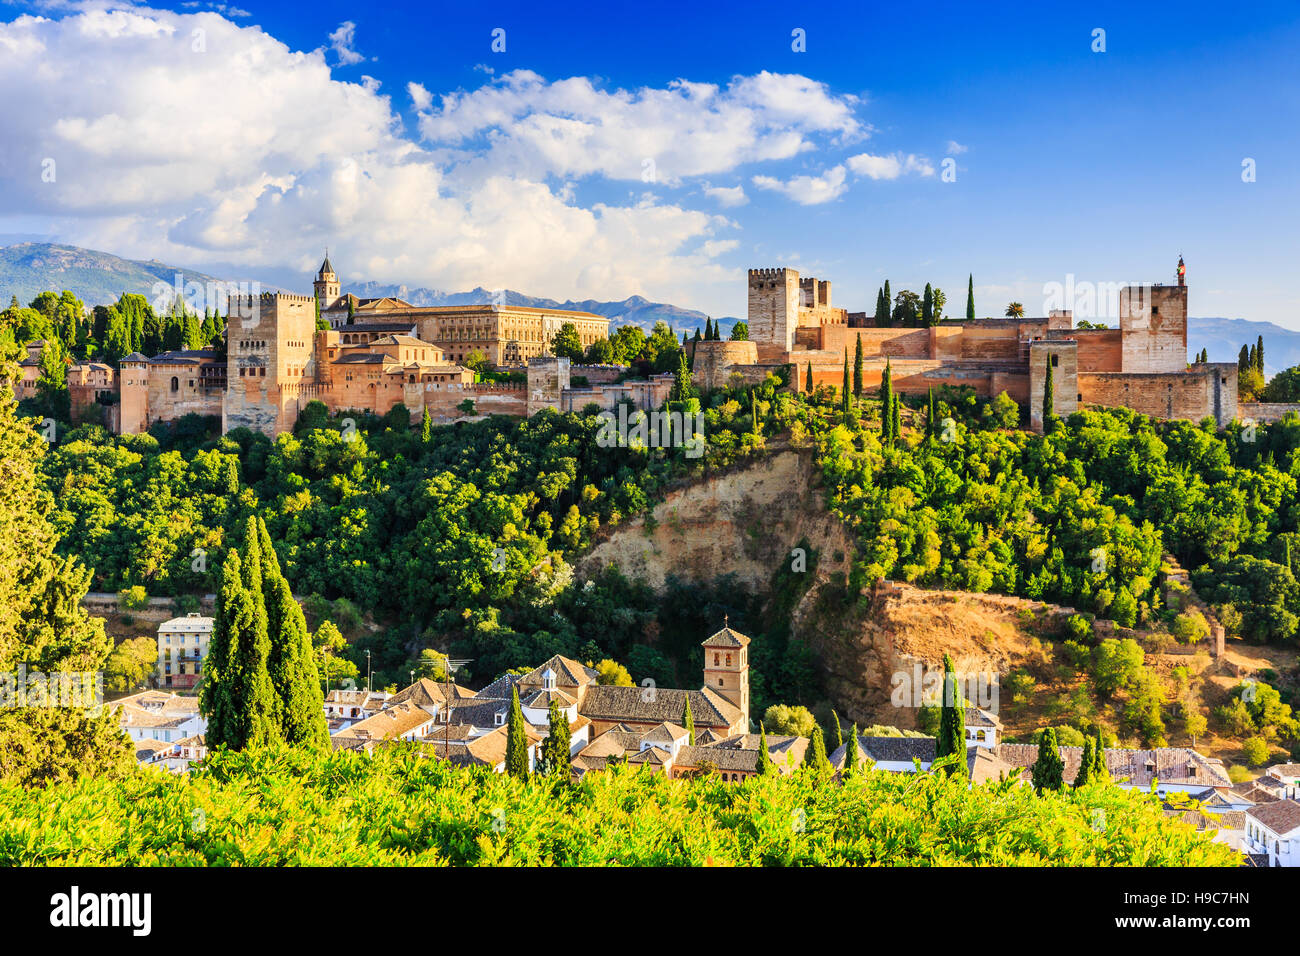 Alhambra of Granada, Spain. Alhambra fortress and Albaicin late afternoon. Stock Photo